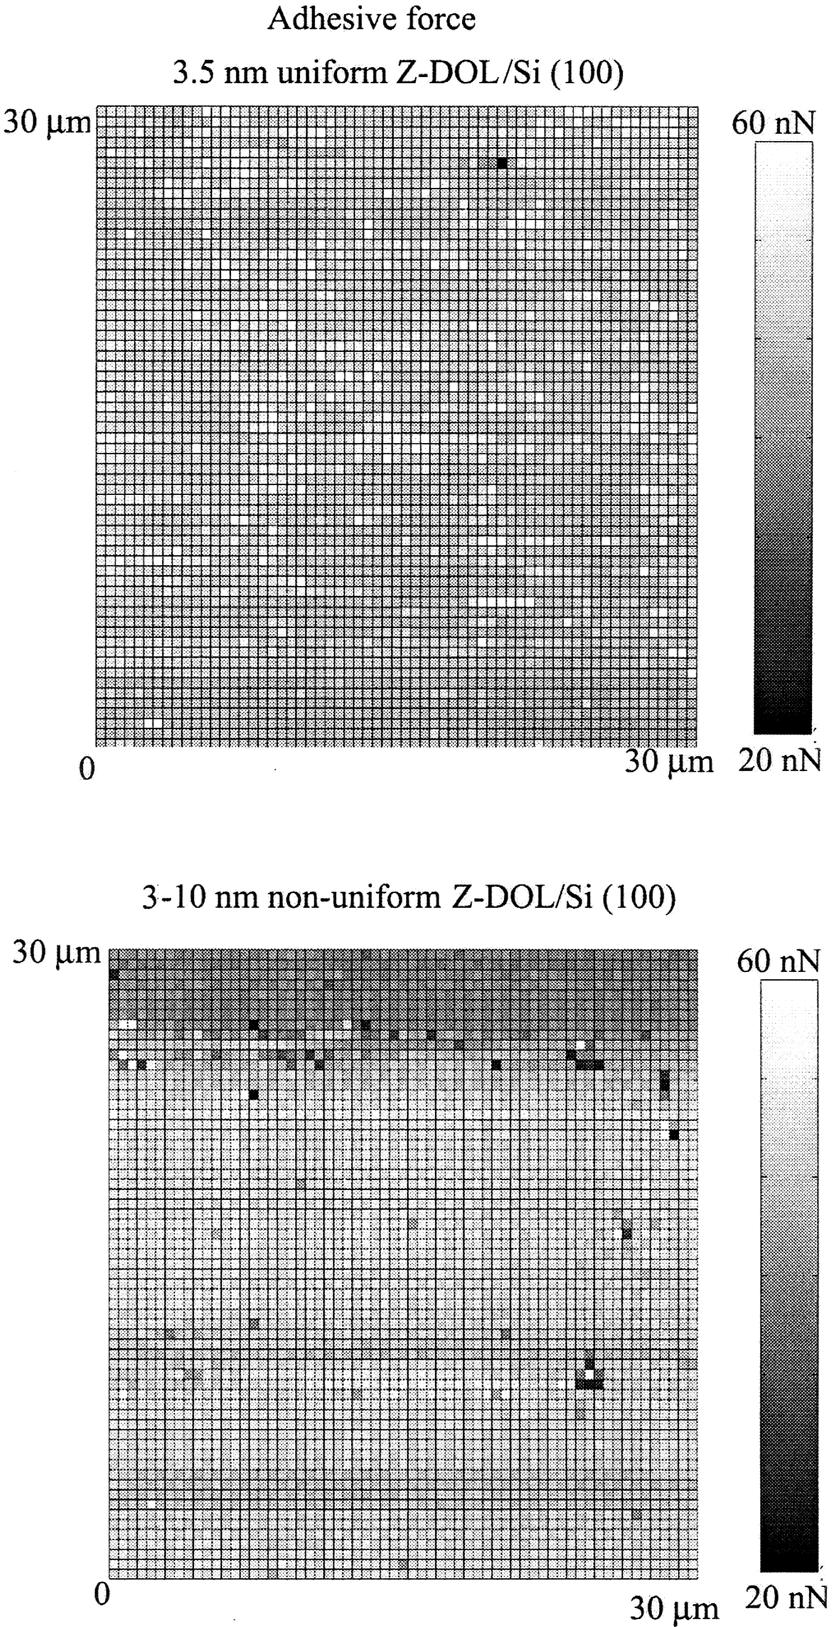 FIGURE 19.42 Gray-scale plots of the adhesive force distribution of a uniformly-coated, 3.